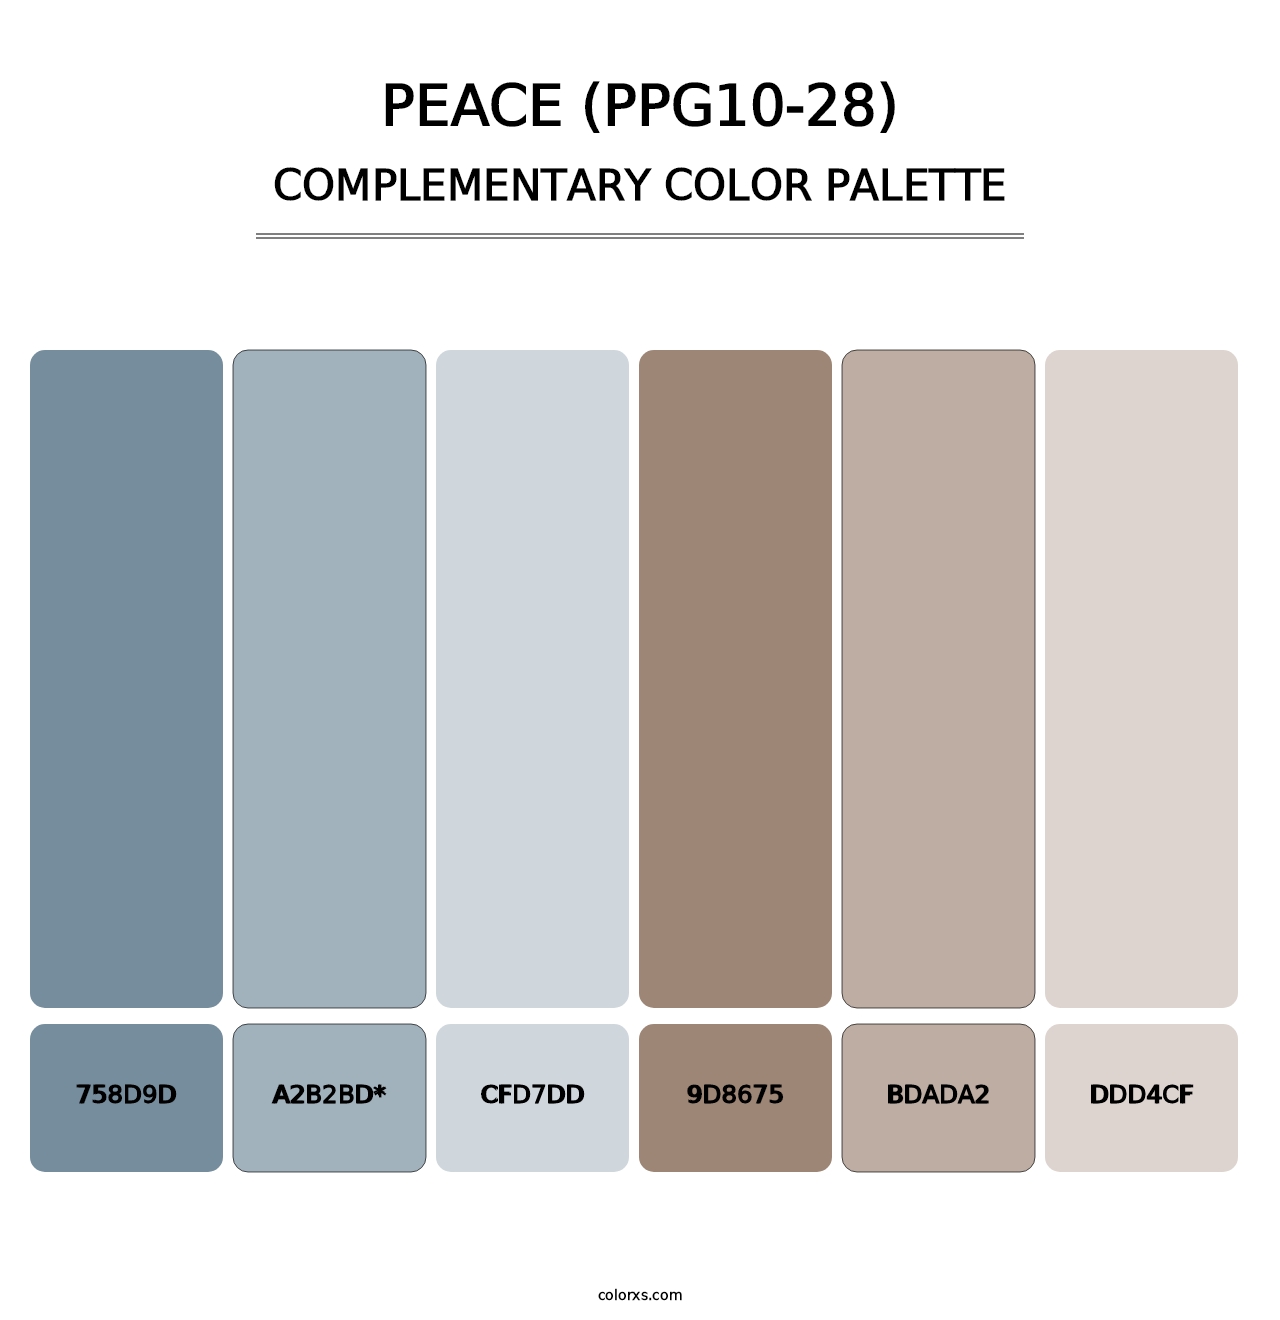 Peace (PPG10-28) - Complementary Color Palette